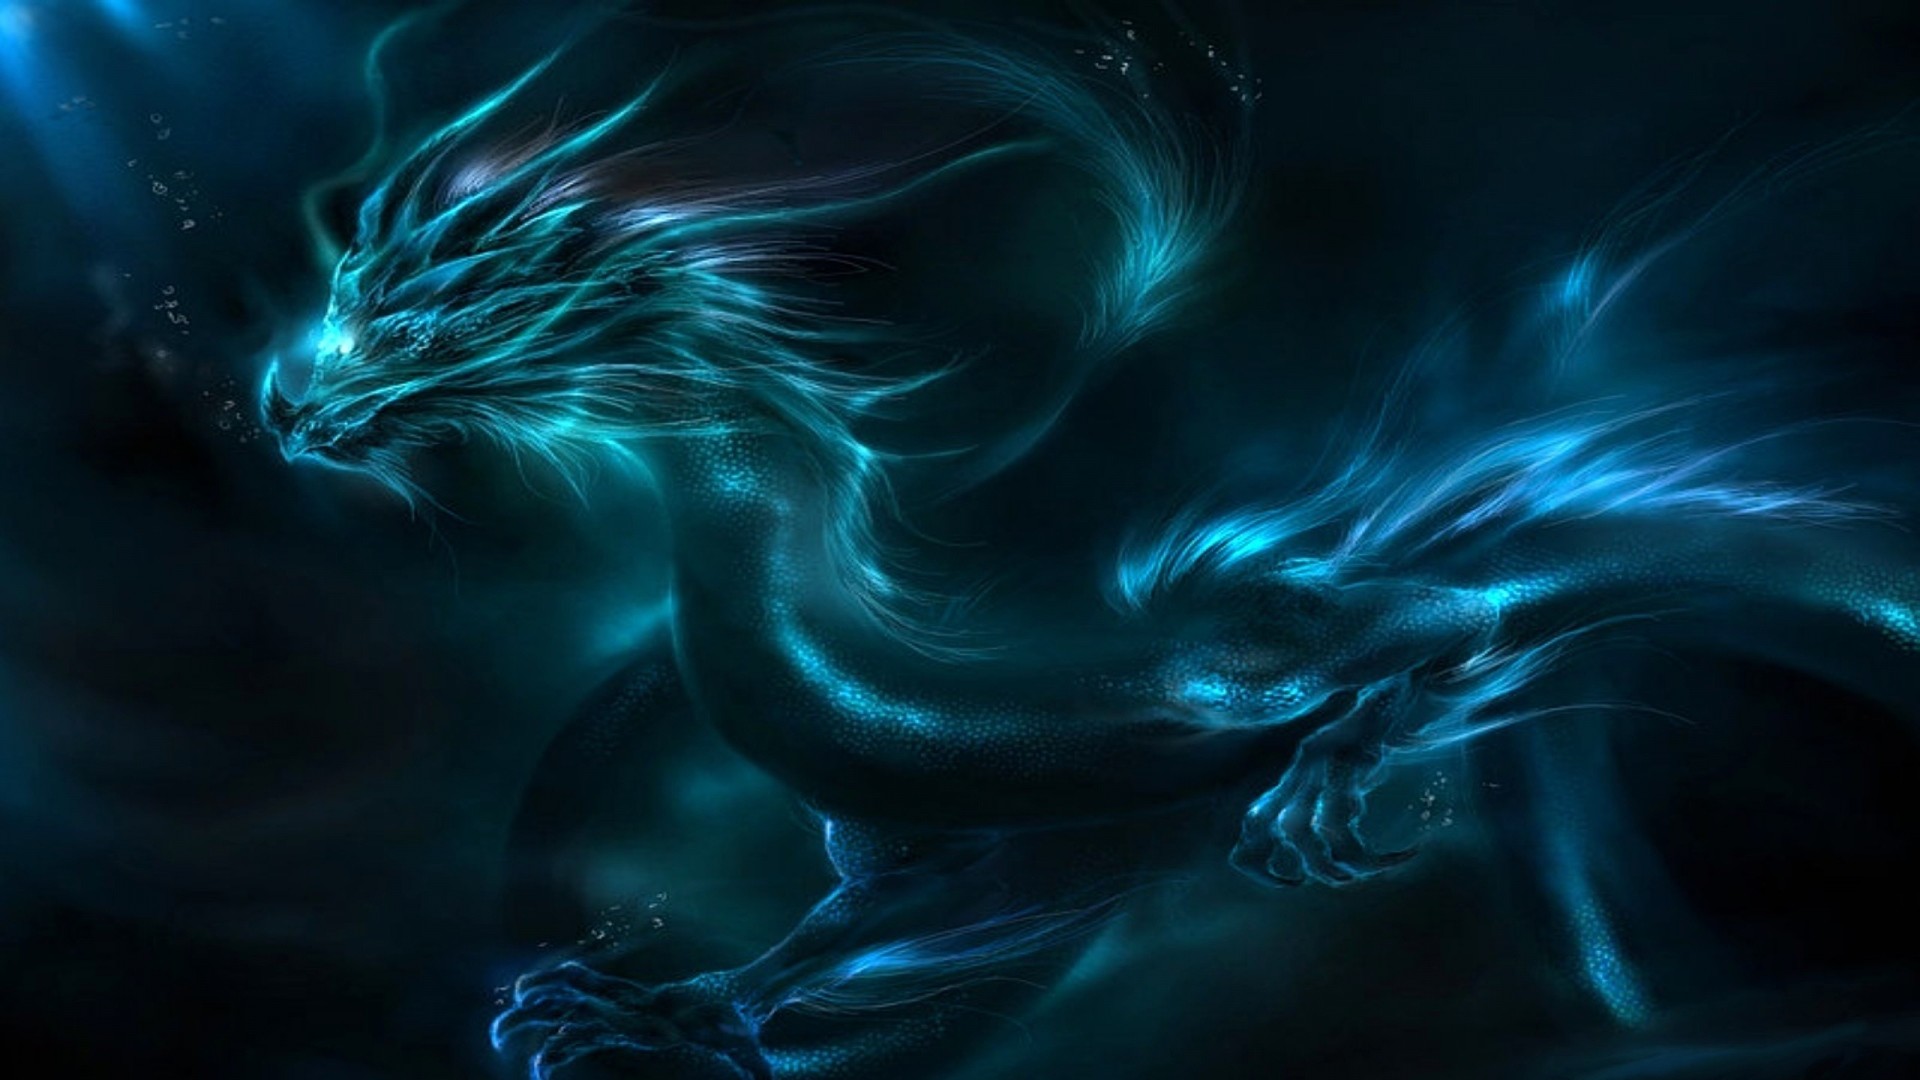 1920x1080 Awesome Dragon Backgrounds